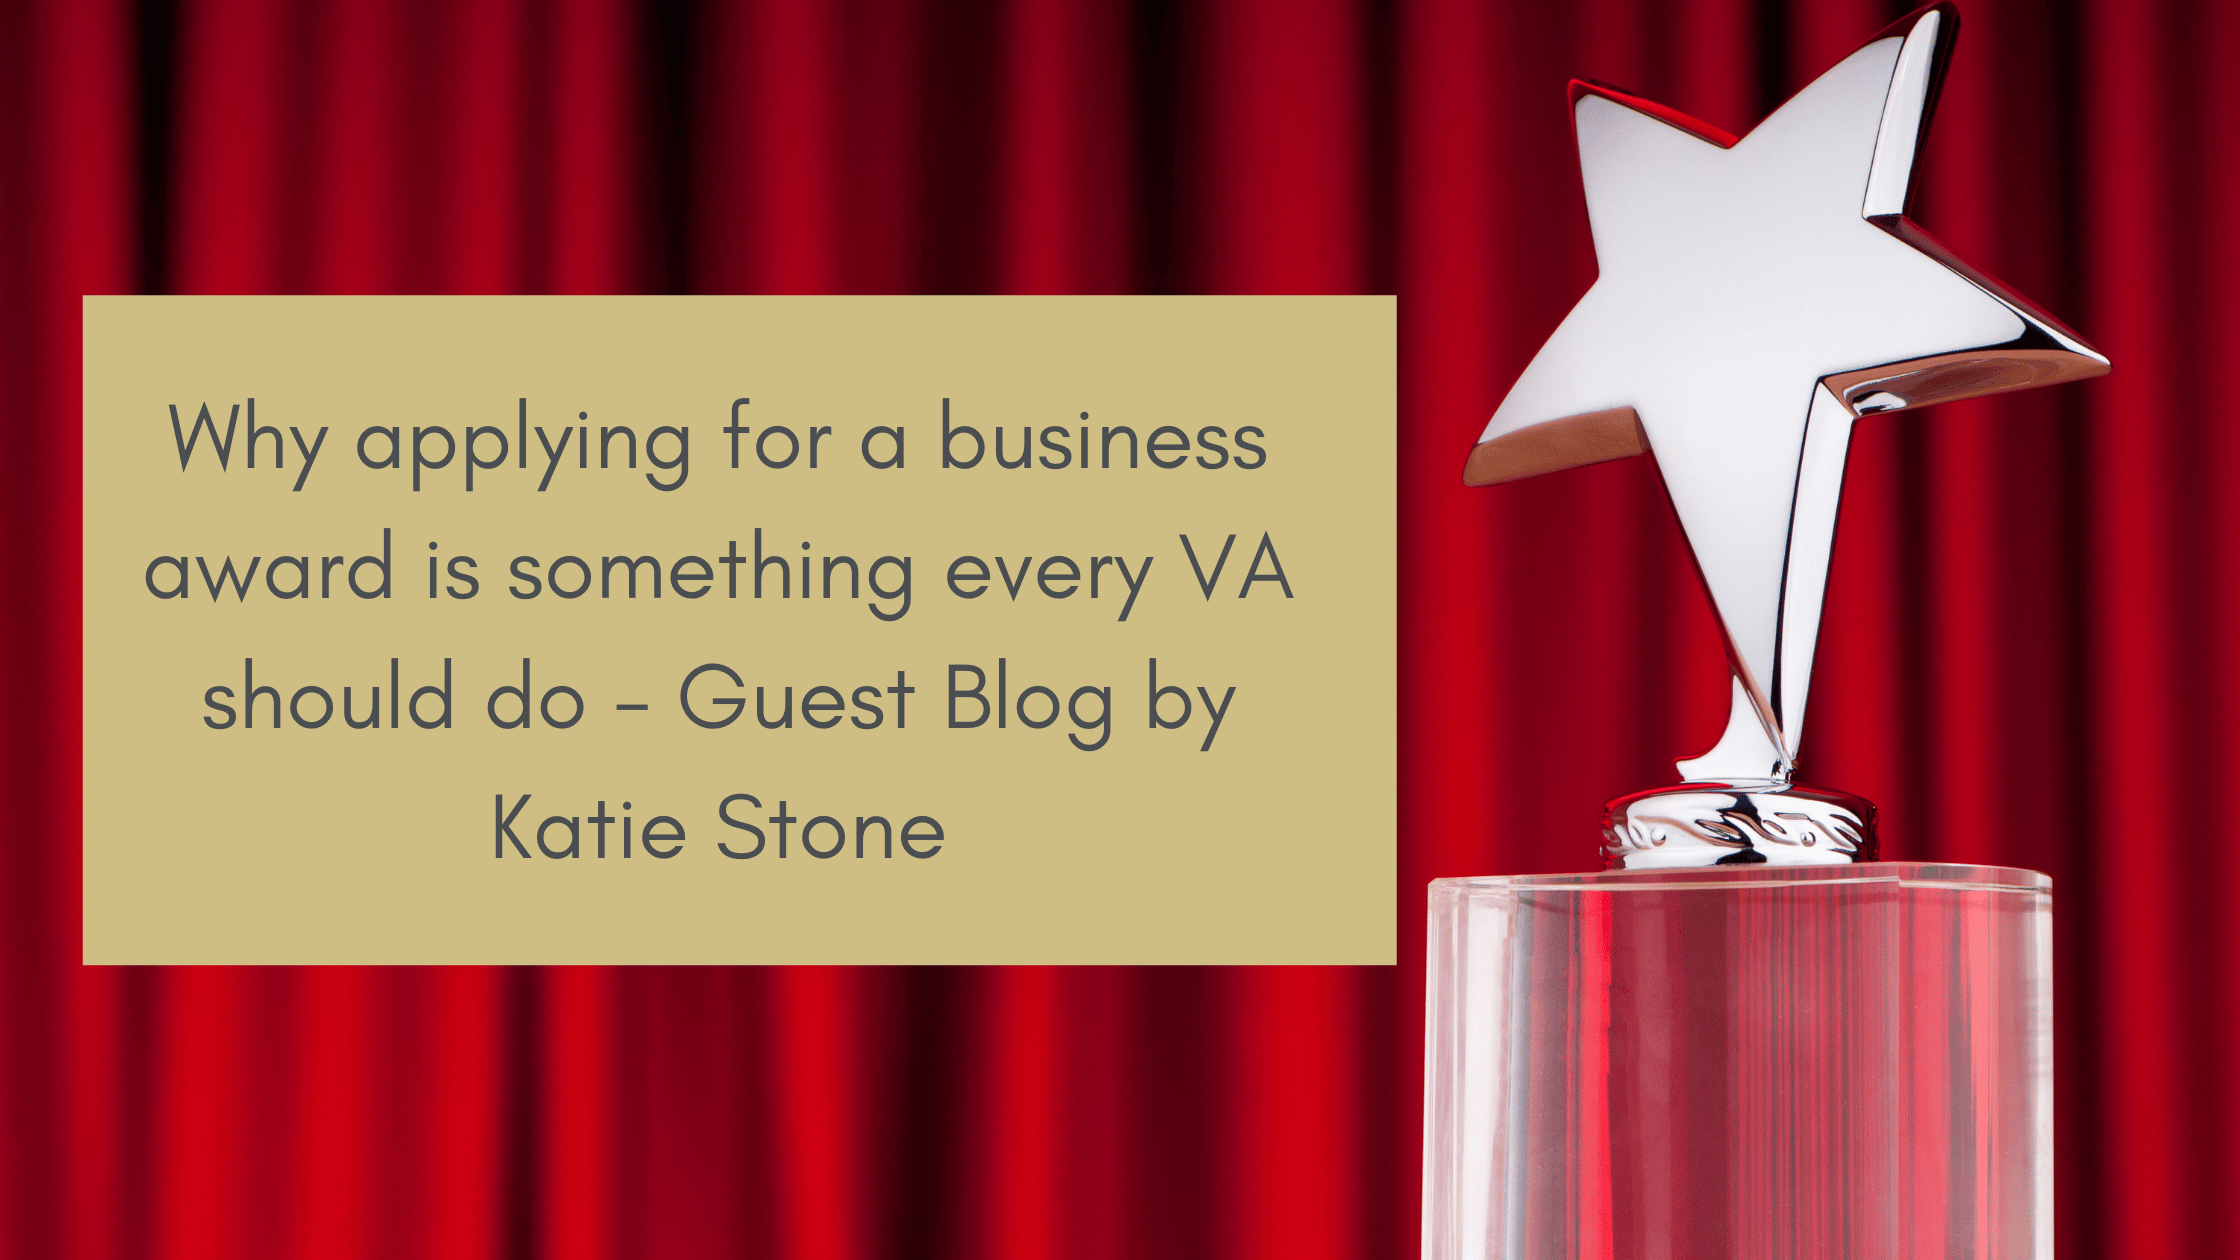 Why applying for a business award is something every VA should do – Guest Blog by Katie Stone